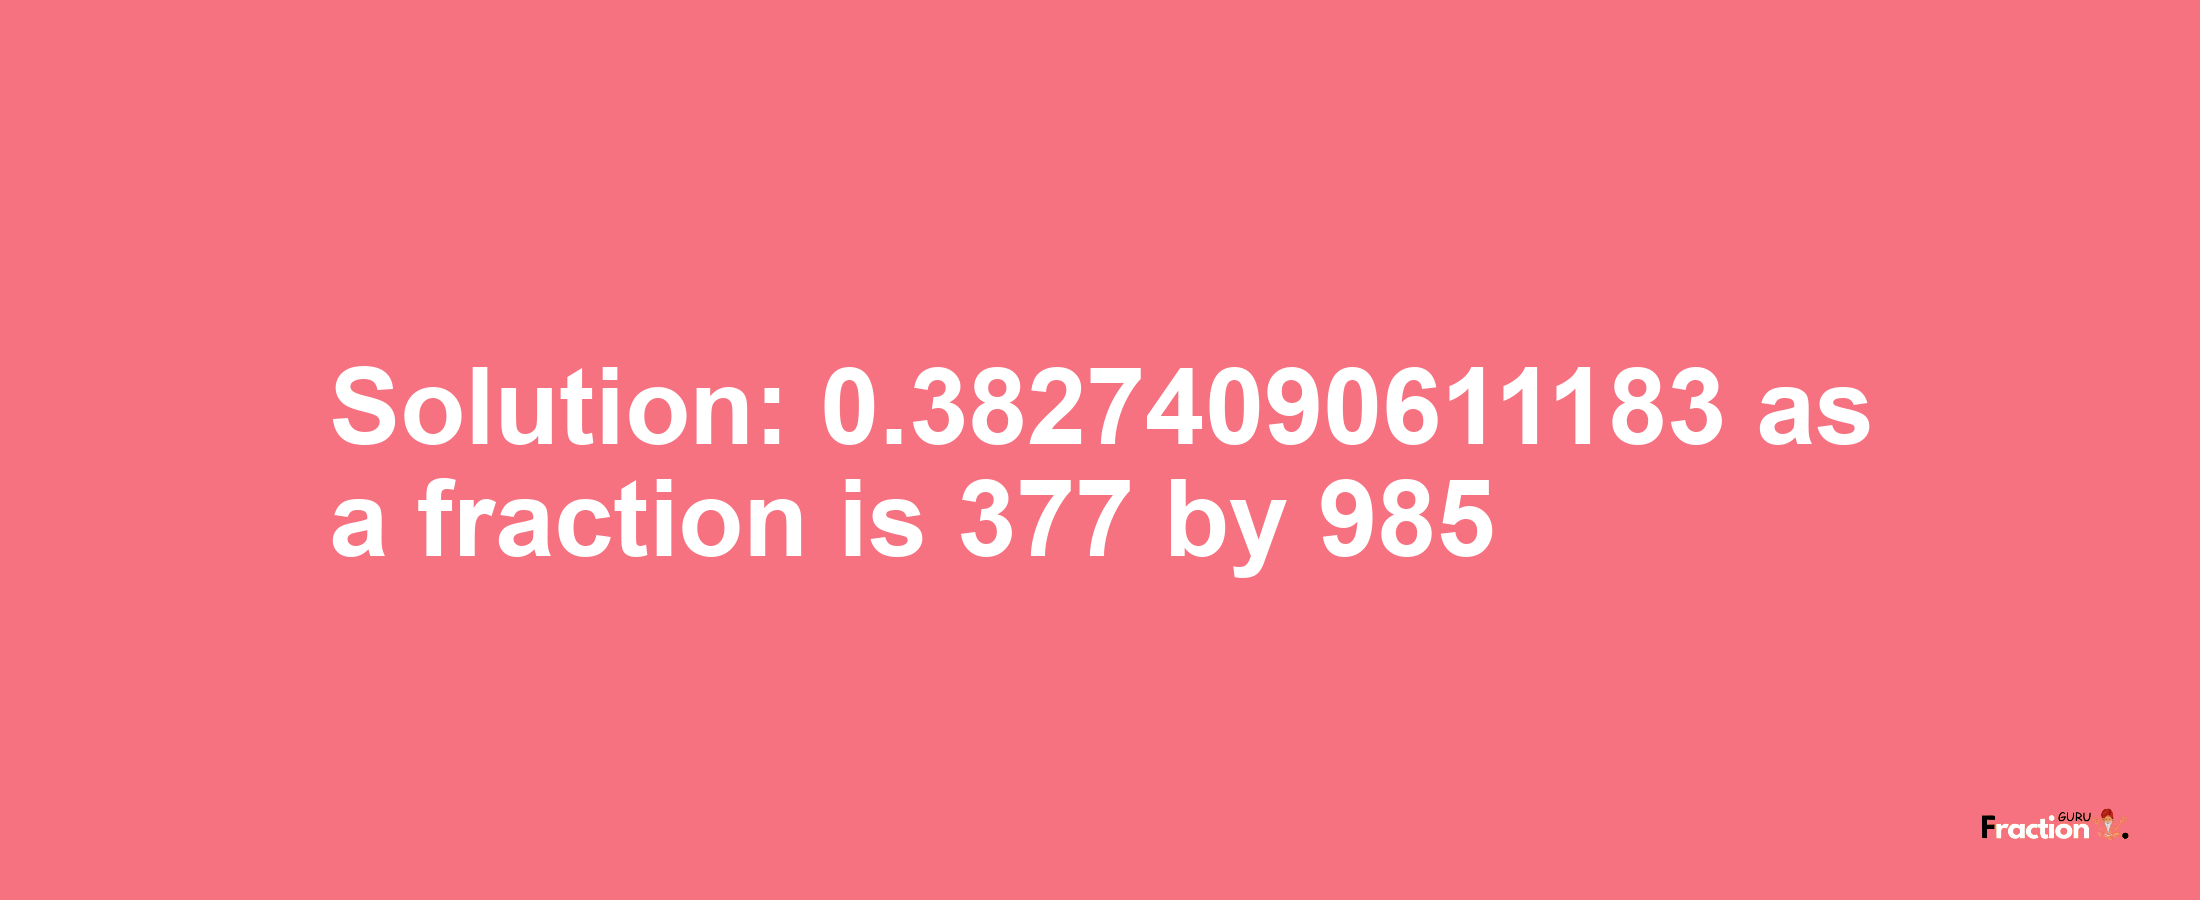 Solution:0.38274090611183 as a fraction is 377/985